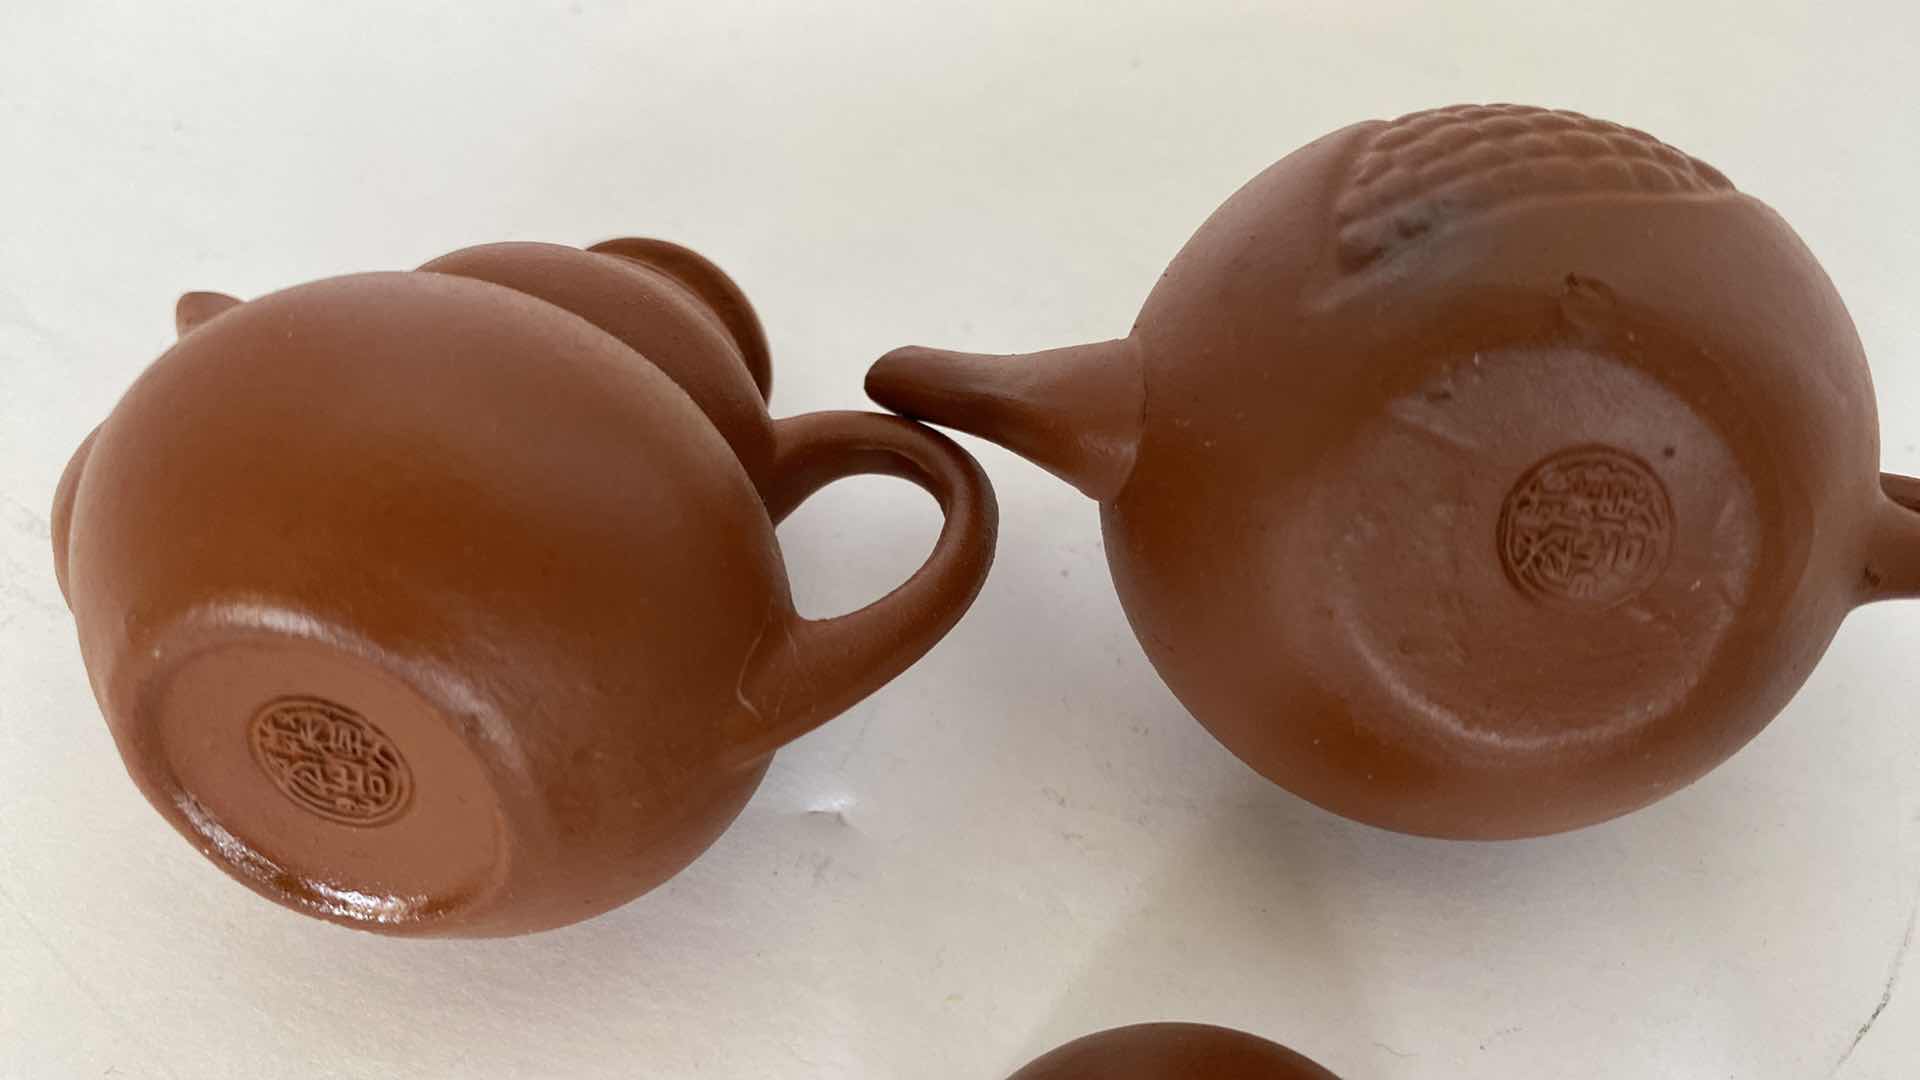 Photo 3 of PAIR OF VINTAGE CHINESE COLLECTIBLE CLAY TEA POTS WITH 4 TEA CUPS LARGEST TEAPOT 3 1/4” x 1 3/4”